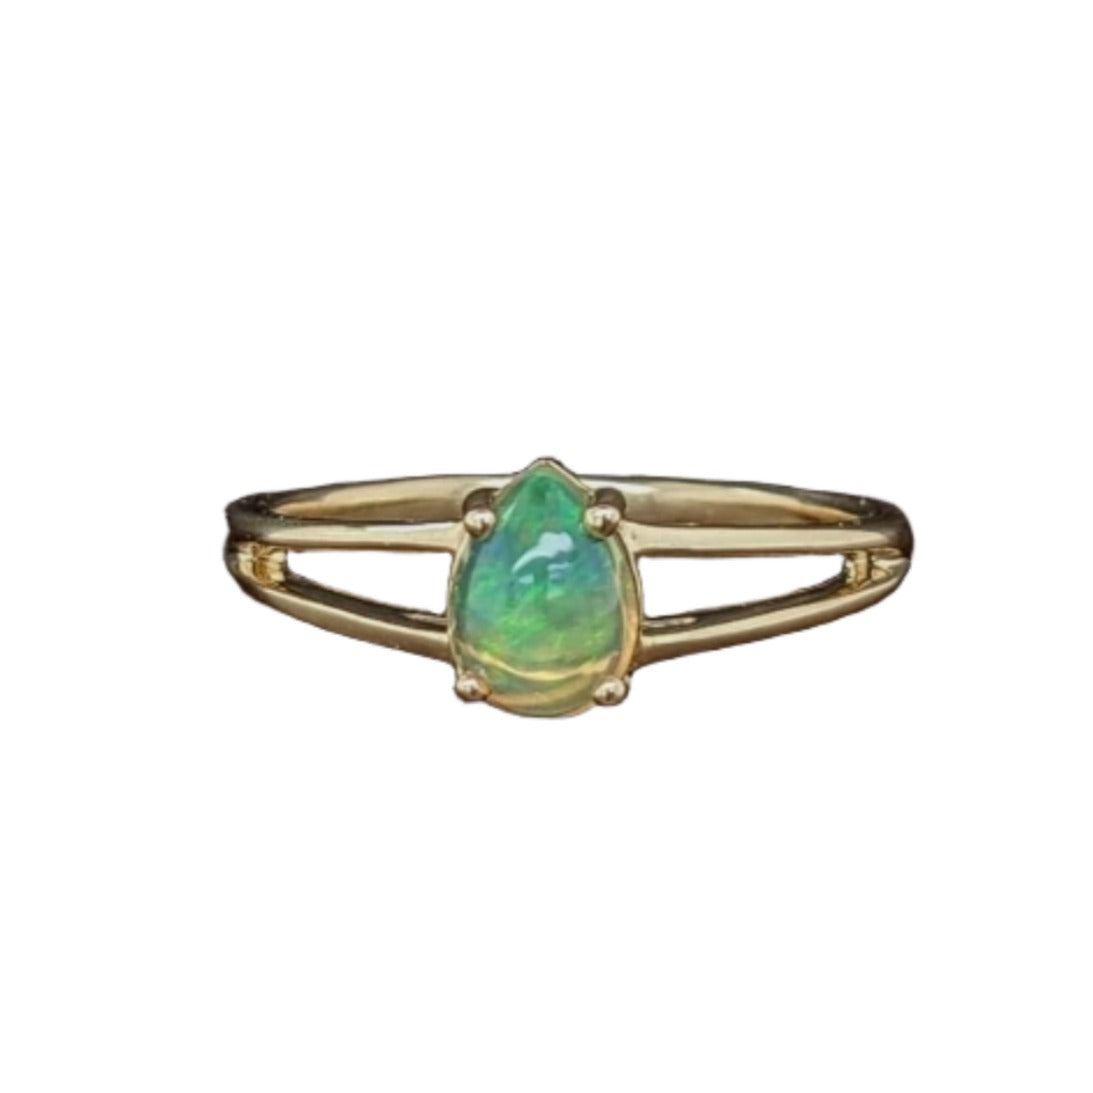 Beautiful Ethiopian Opal Solitaire Ring in Solid 14K Yellow Gold | Pear 7x5mm